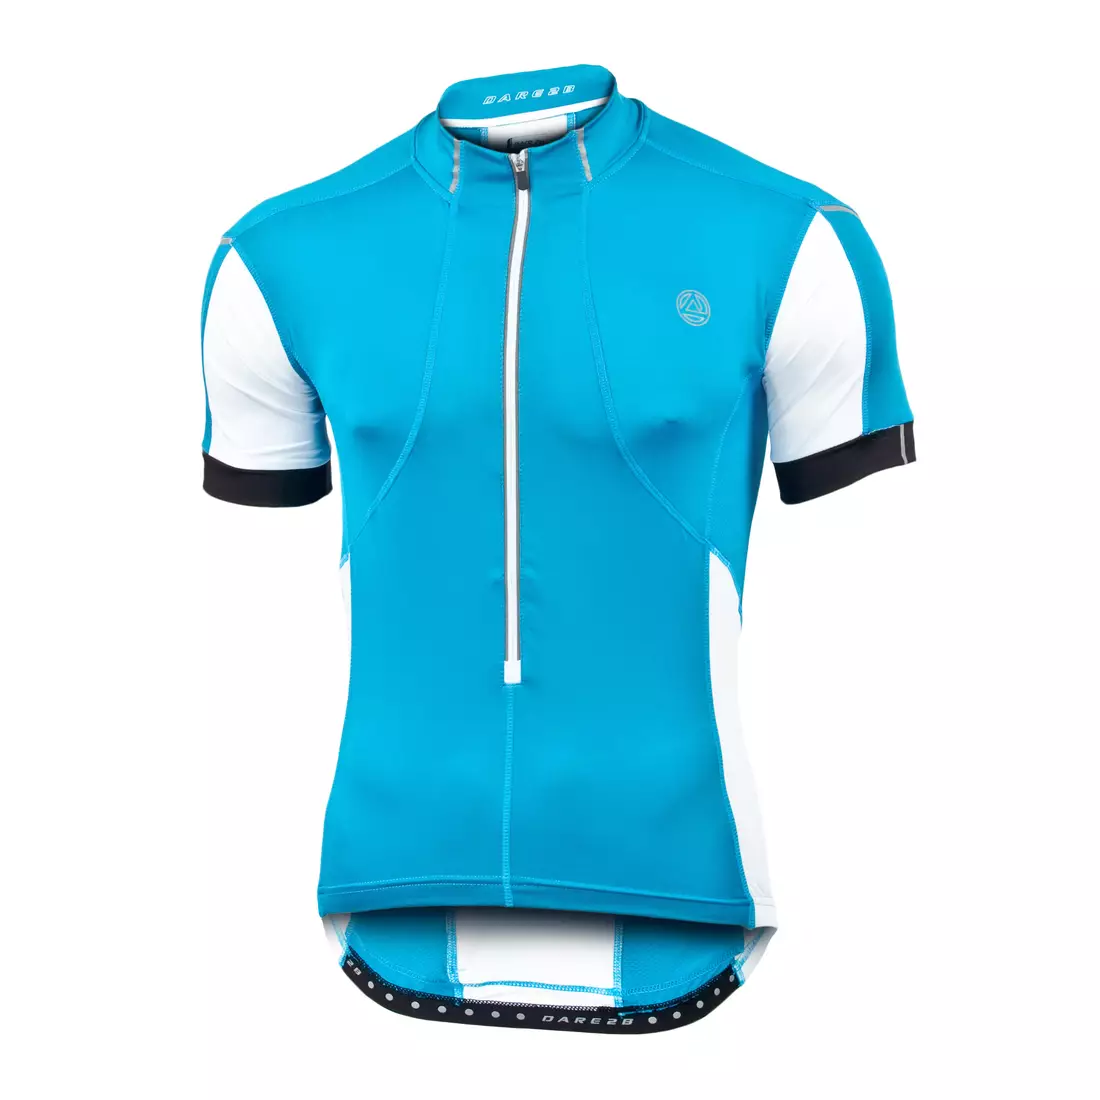 DARE2B EXPEND - men's cycling jersey, DMT106-5NN